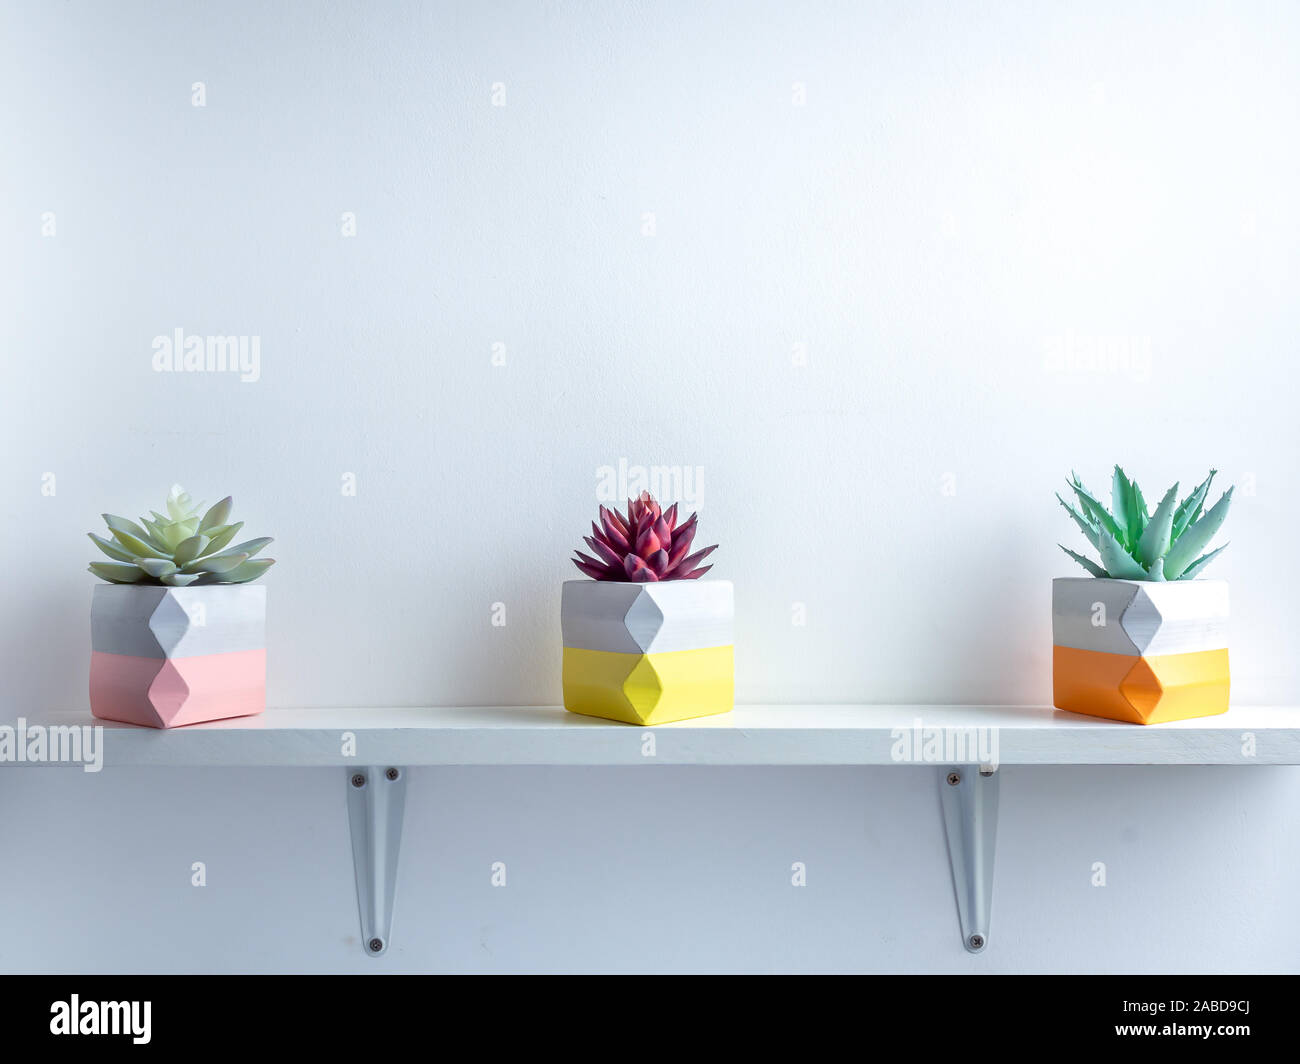 Cactus pot. Beautiful painted concrete pot. Red and green succulent plants in colorful modern triangle concrete planters on white wooden shelf on whit Stock Photo